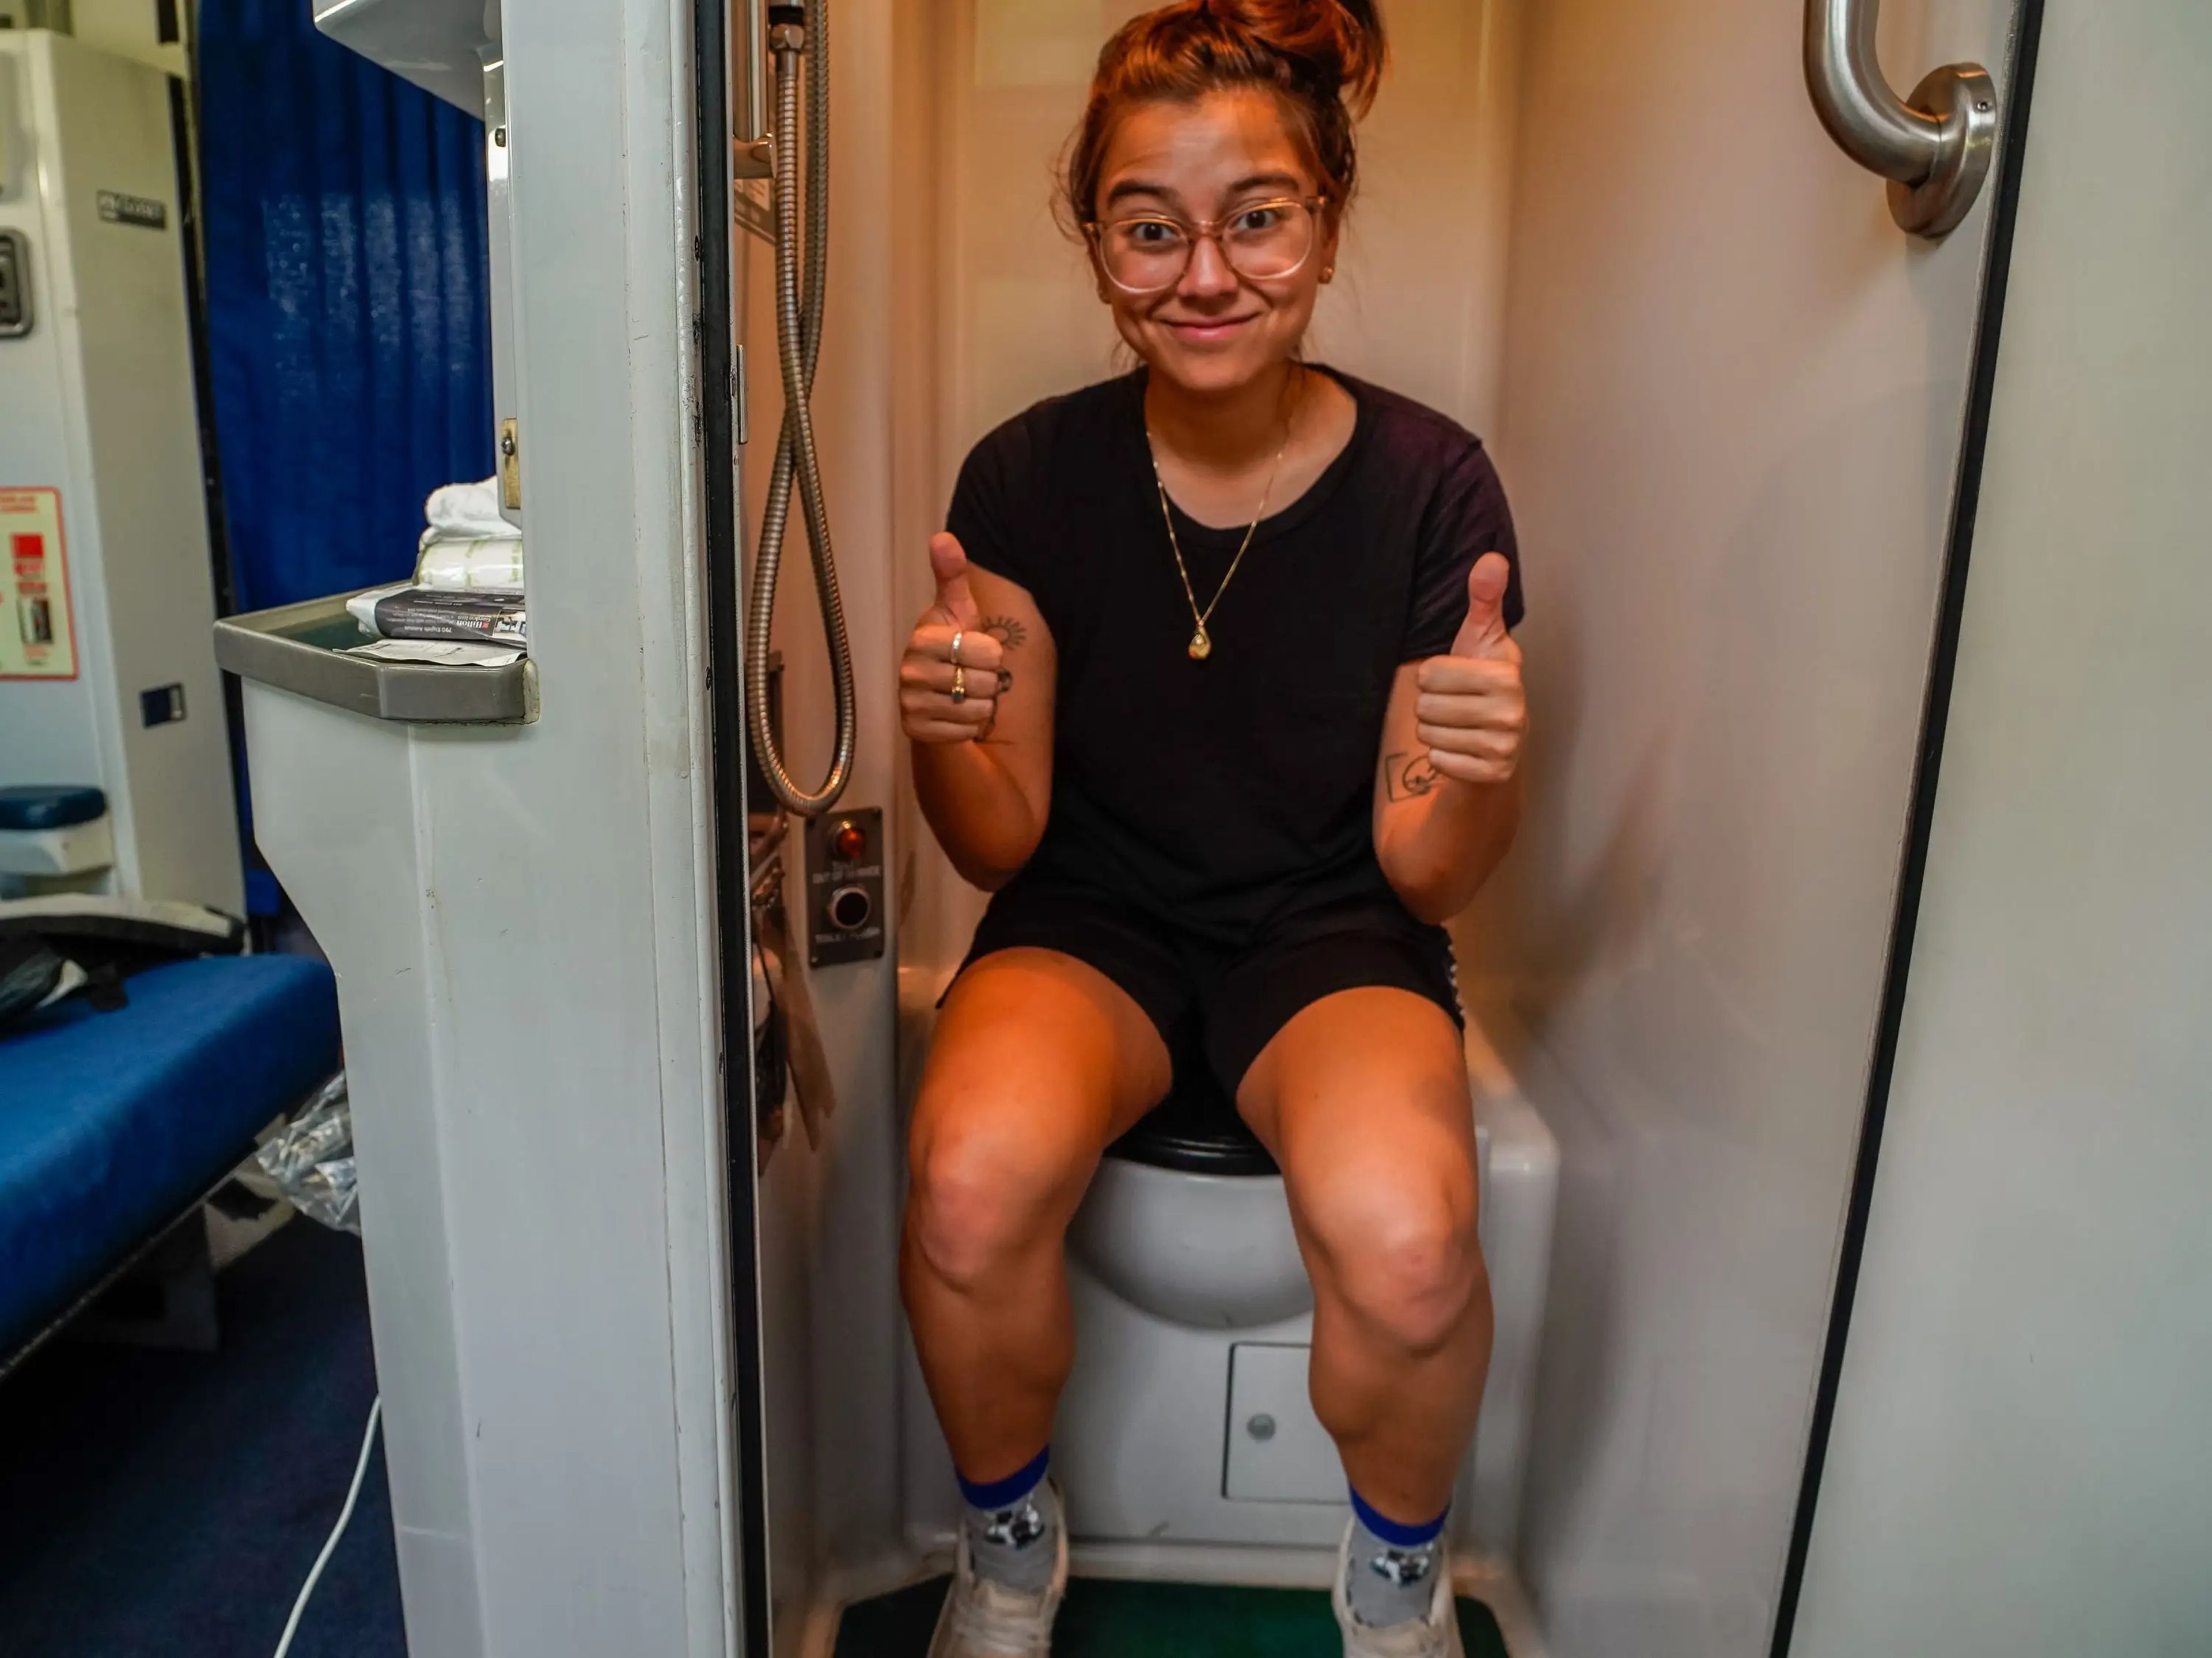 The author sits on the train toilet with her thumbs up